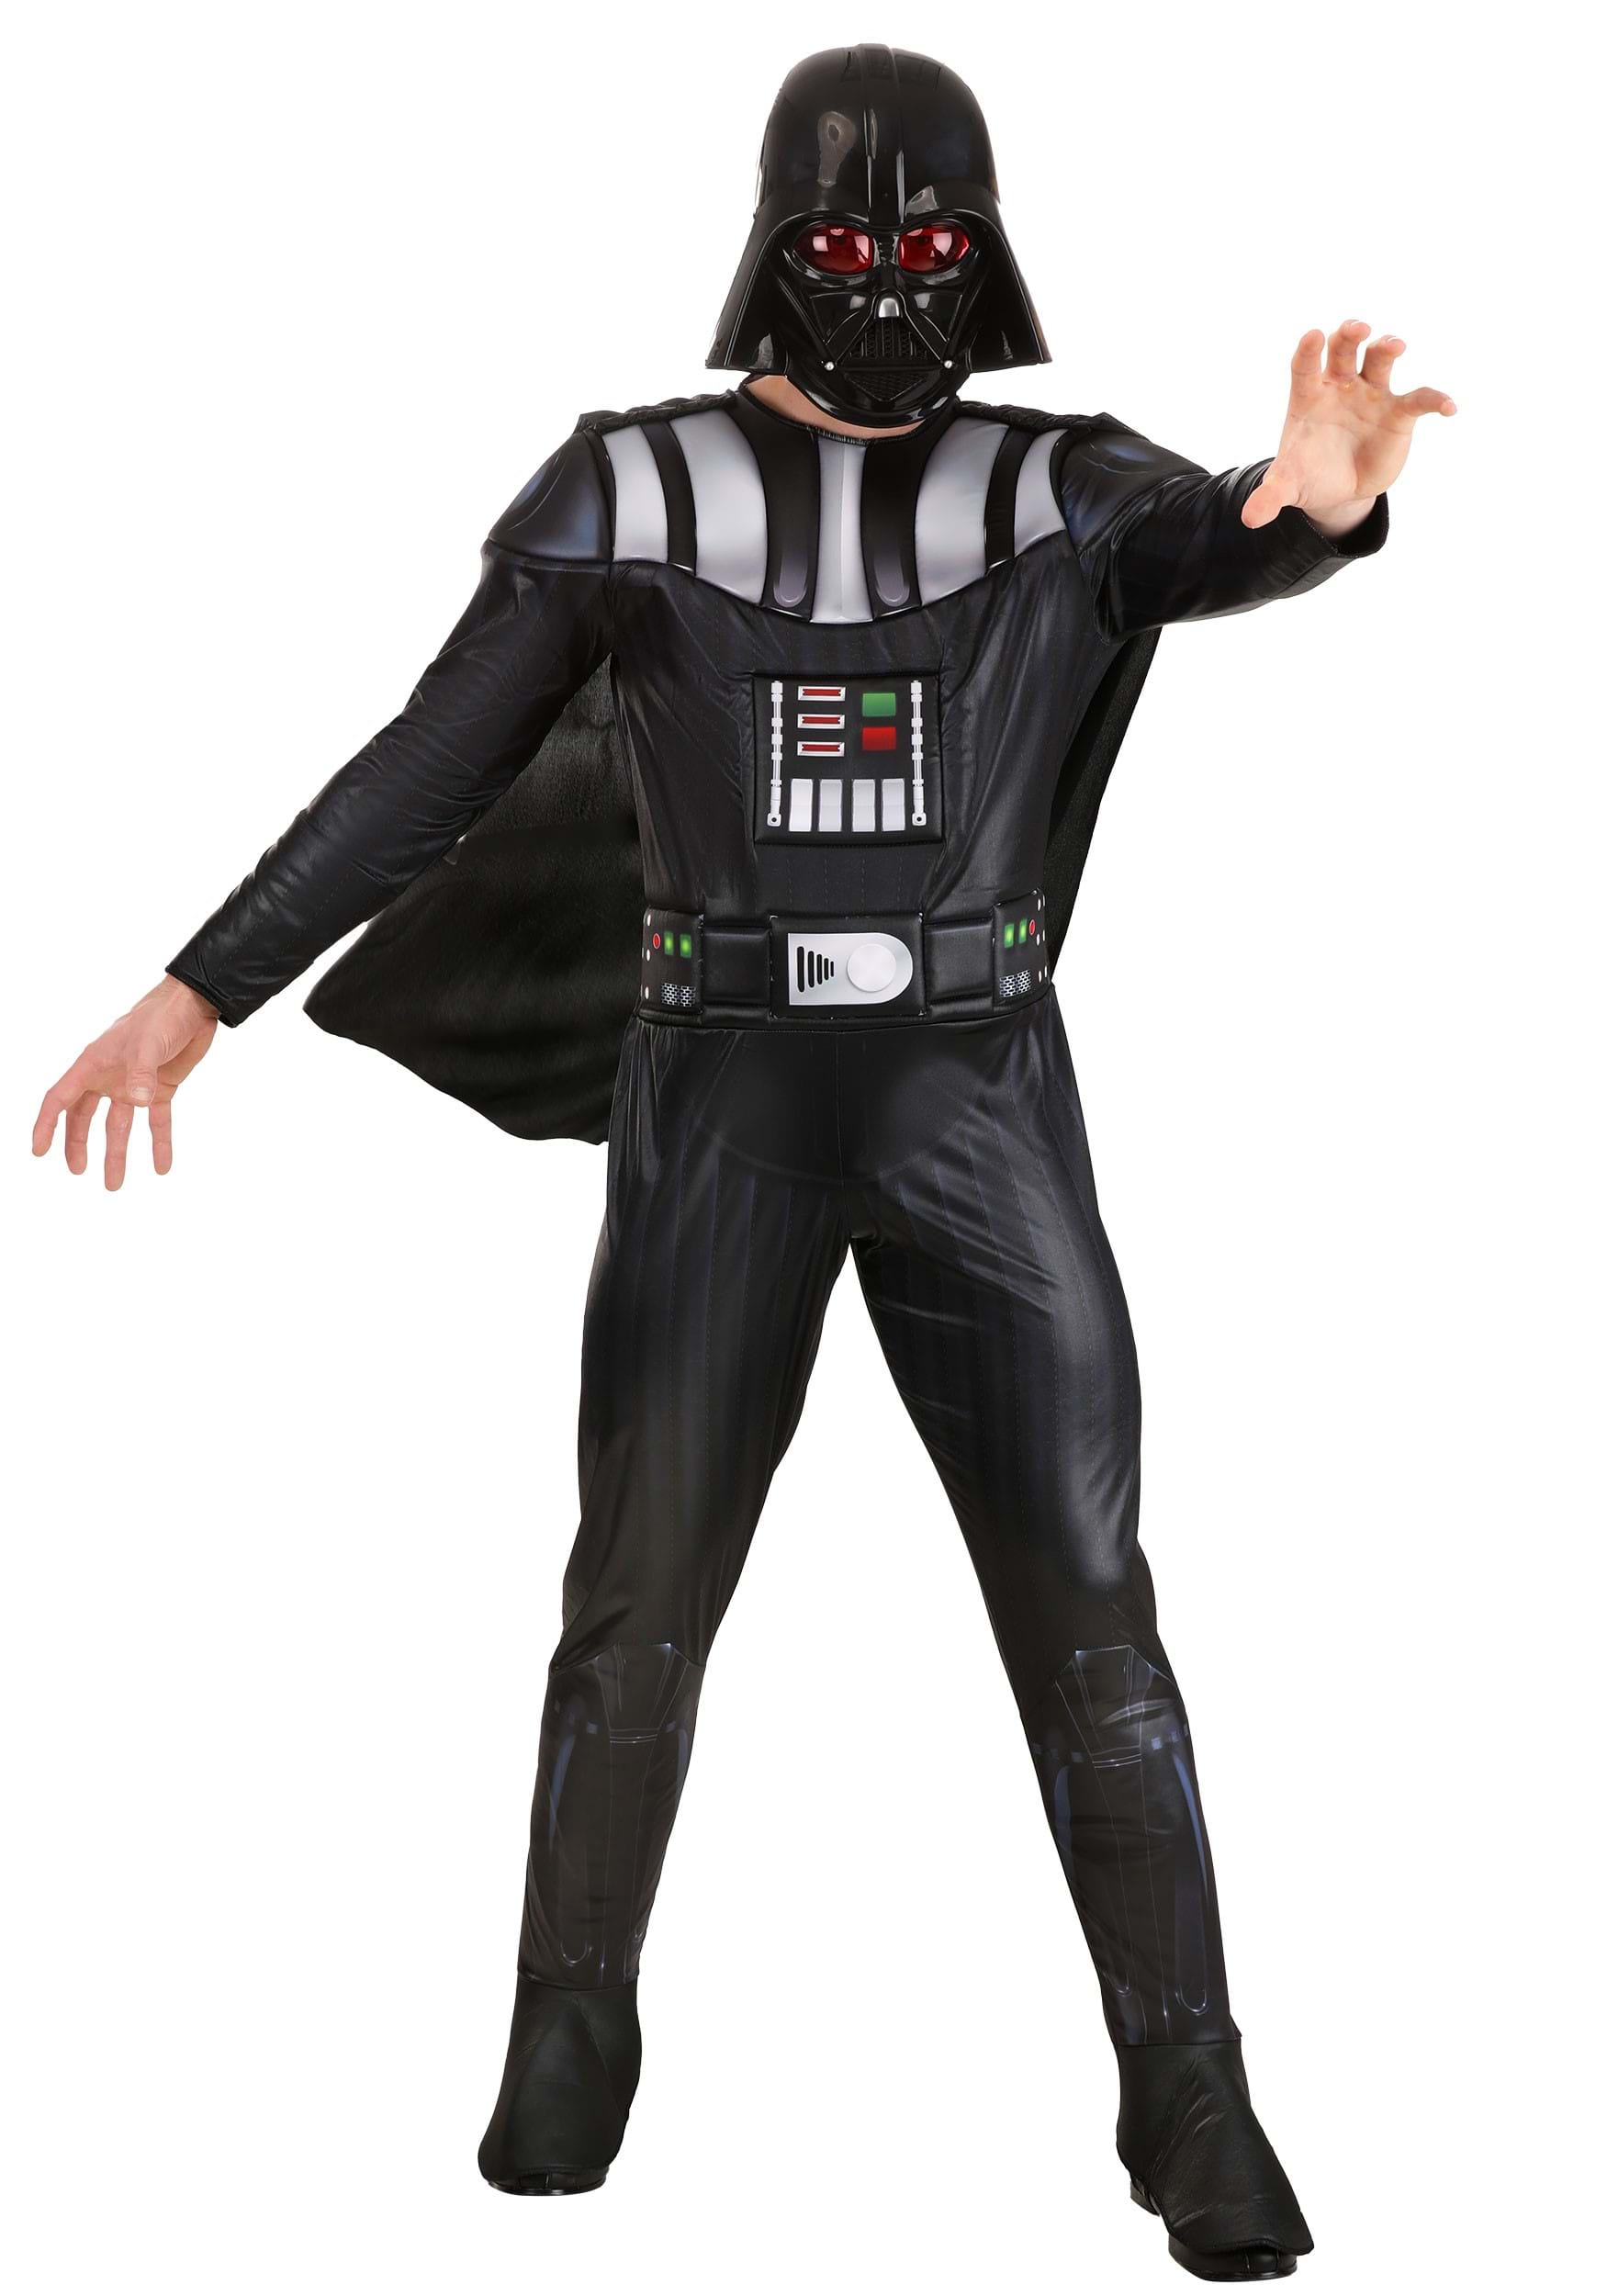 Image of Exclusive Darth Vader Adult Costume ID JWC0995-XL